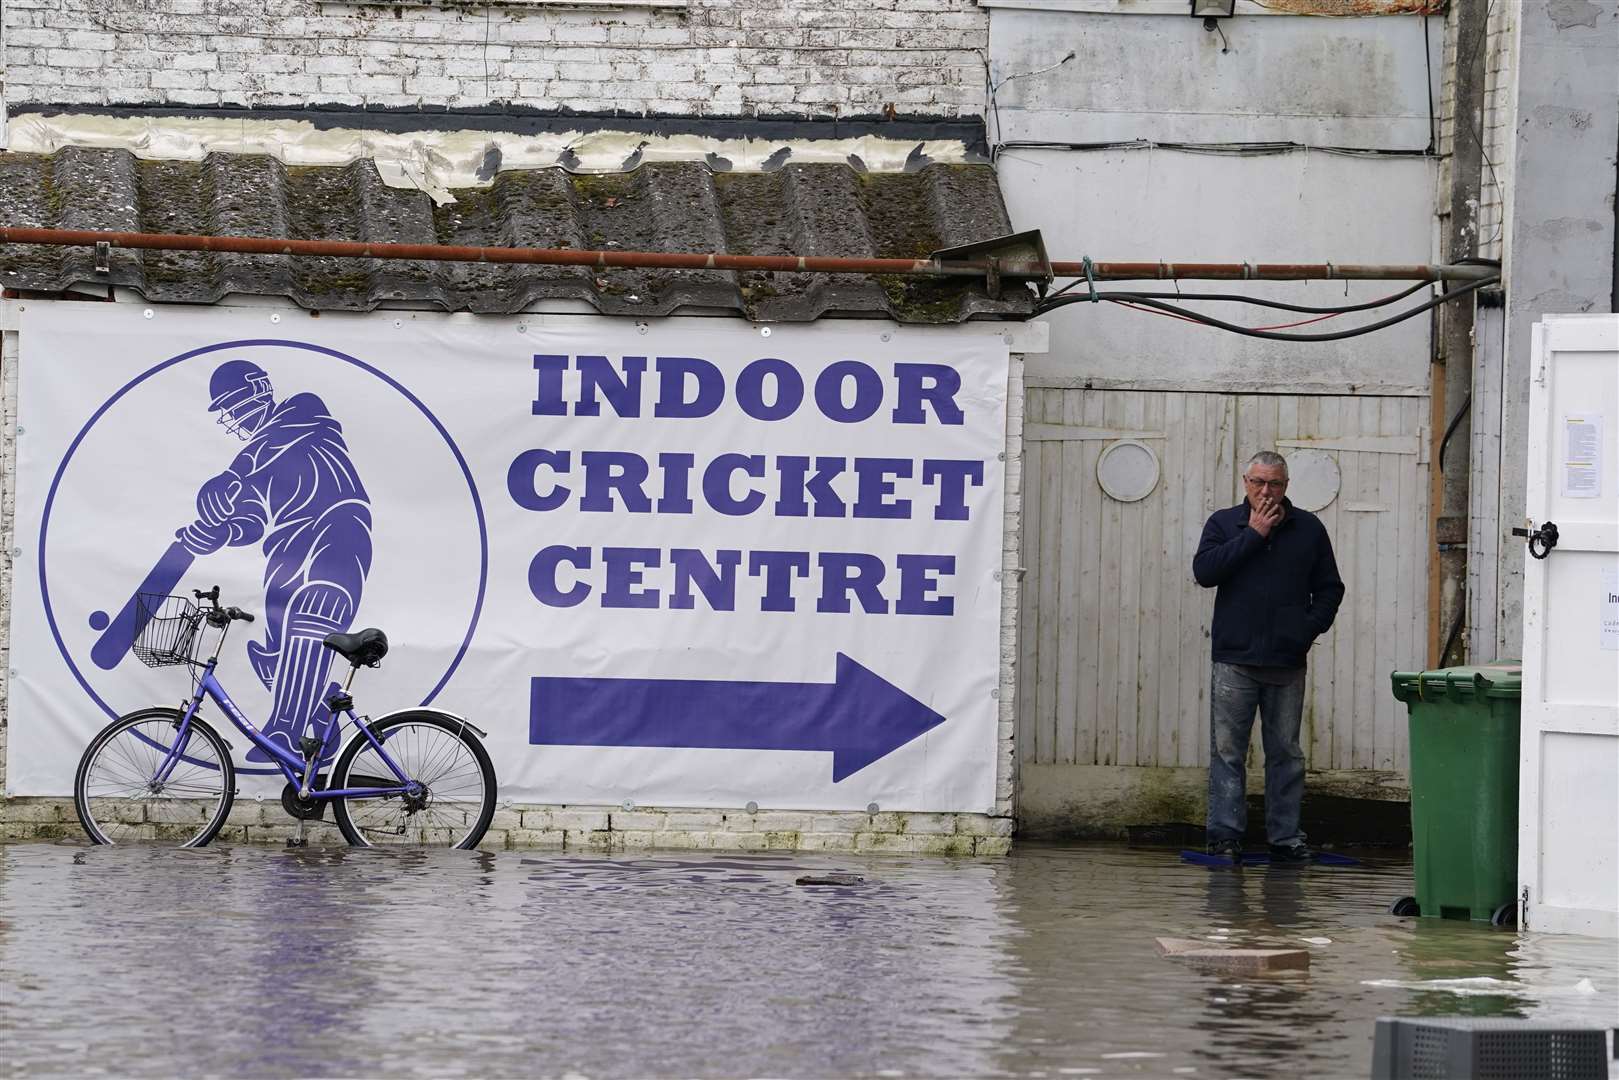 Flooding near Littlehampton Indoor Cricket Centre on Rope Walk in West Sussex after the River Arun burst its banks overnight (Gareth Fuller/PA)